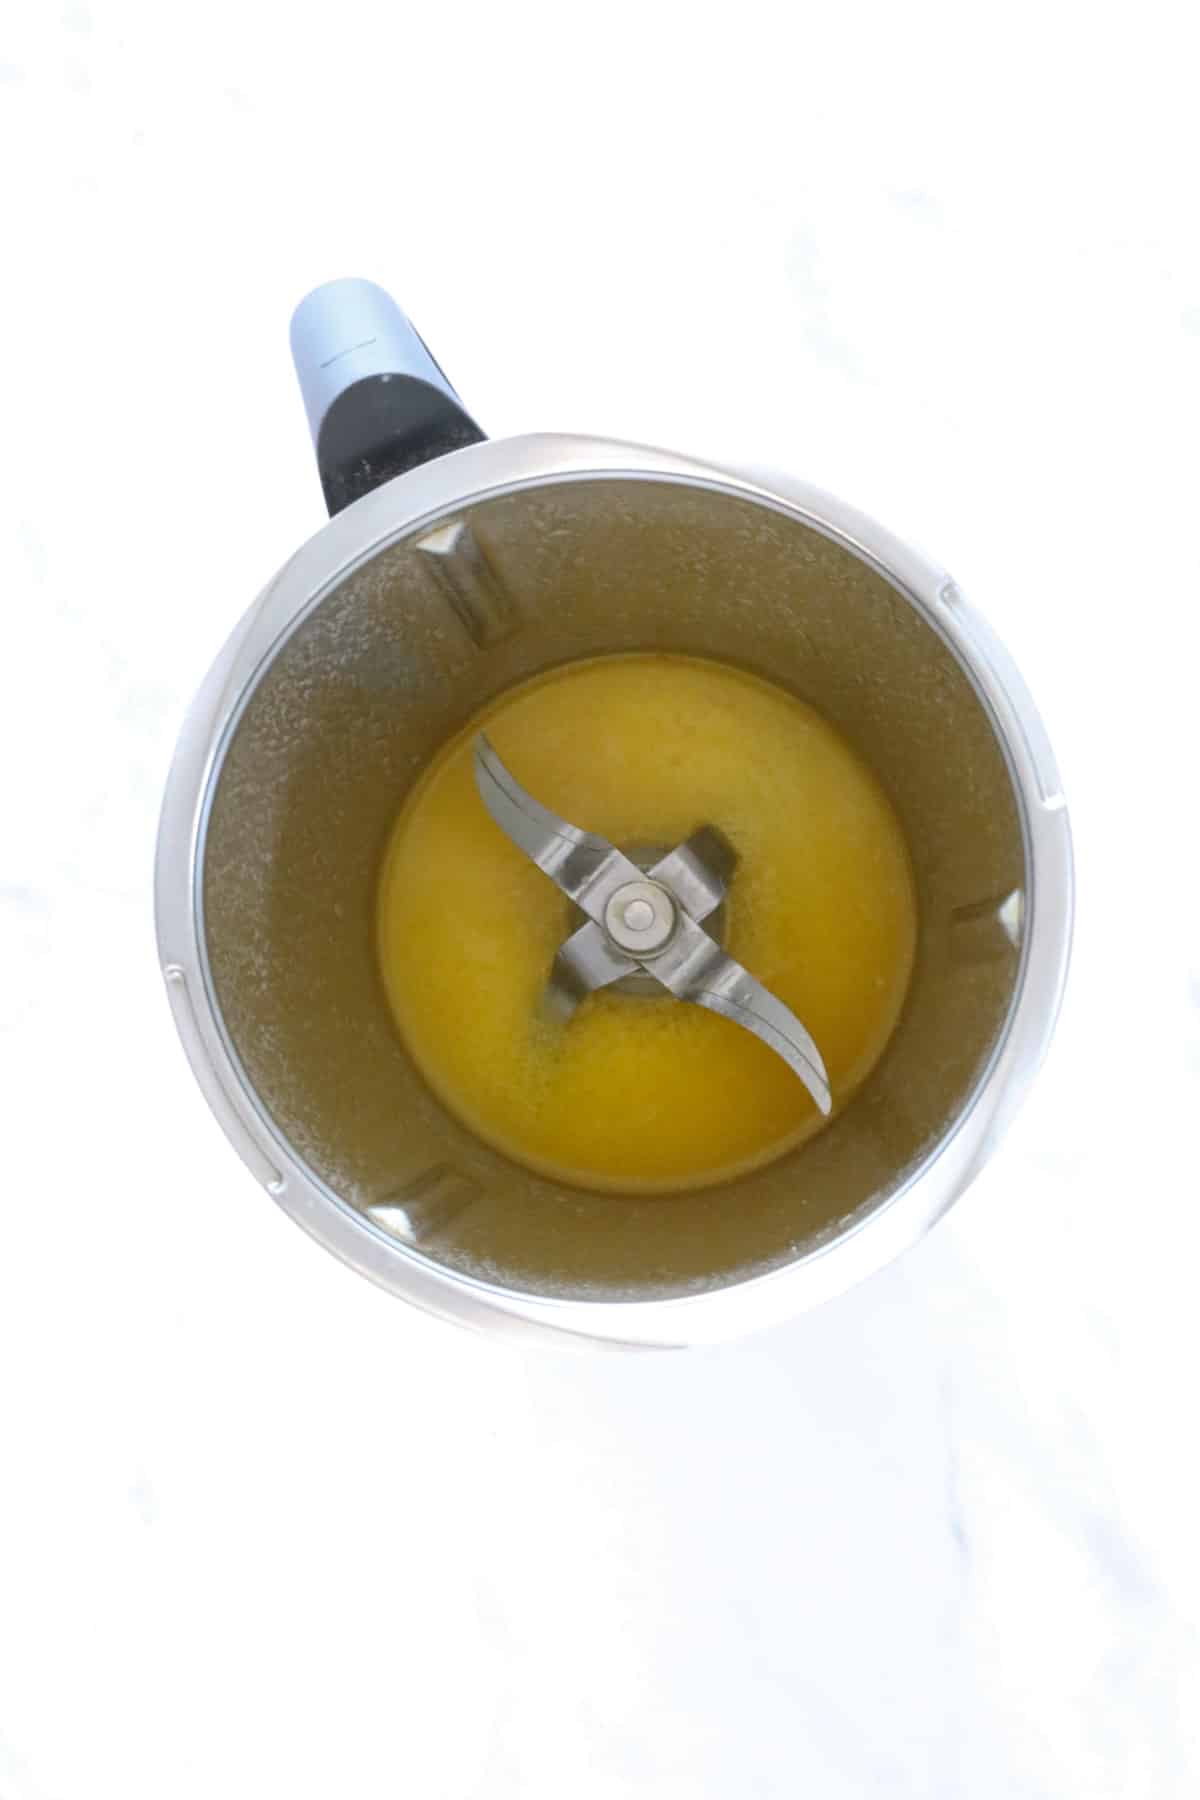 Melted butter in a stainless jug